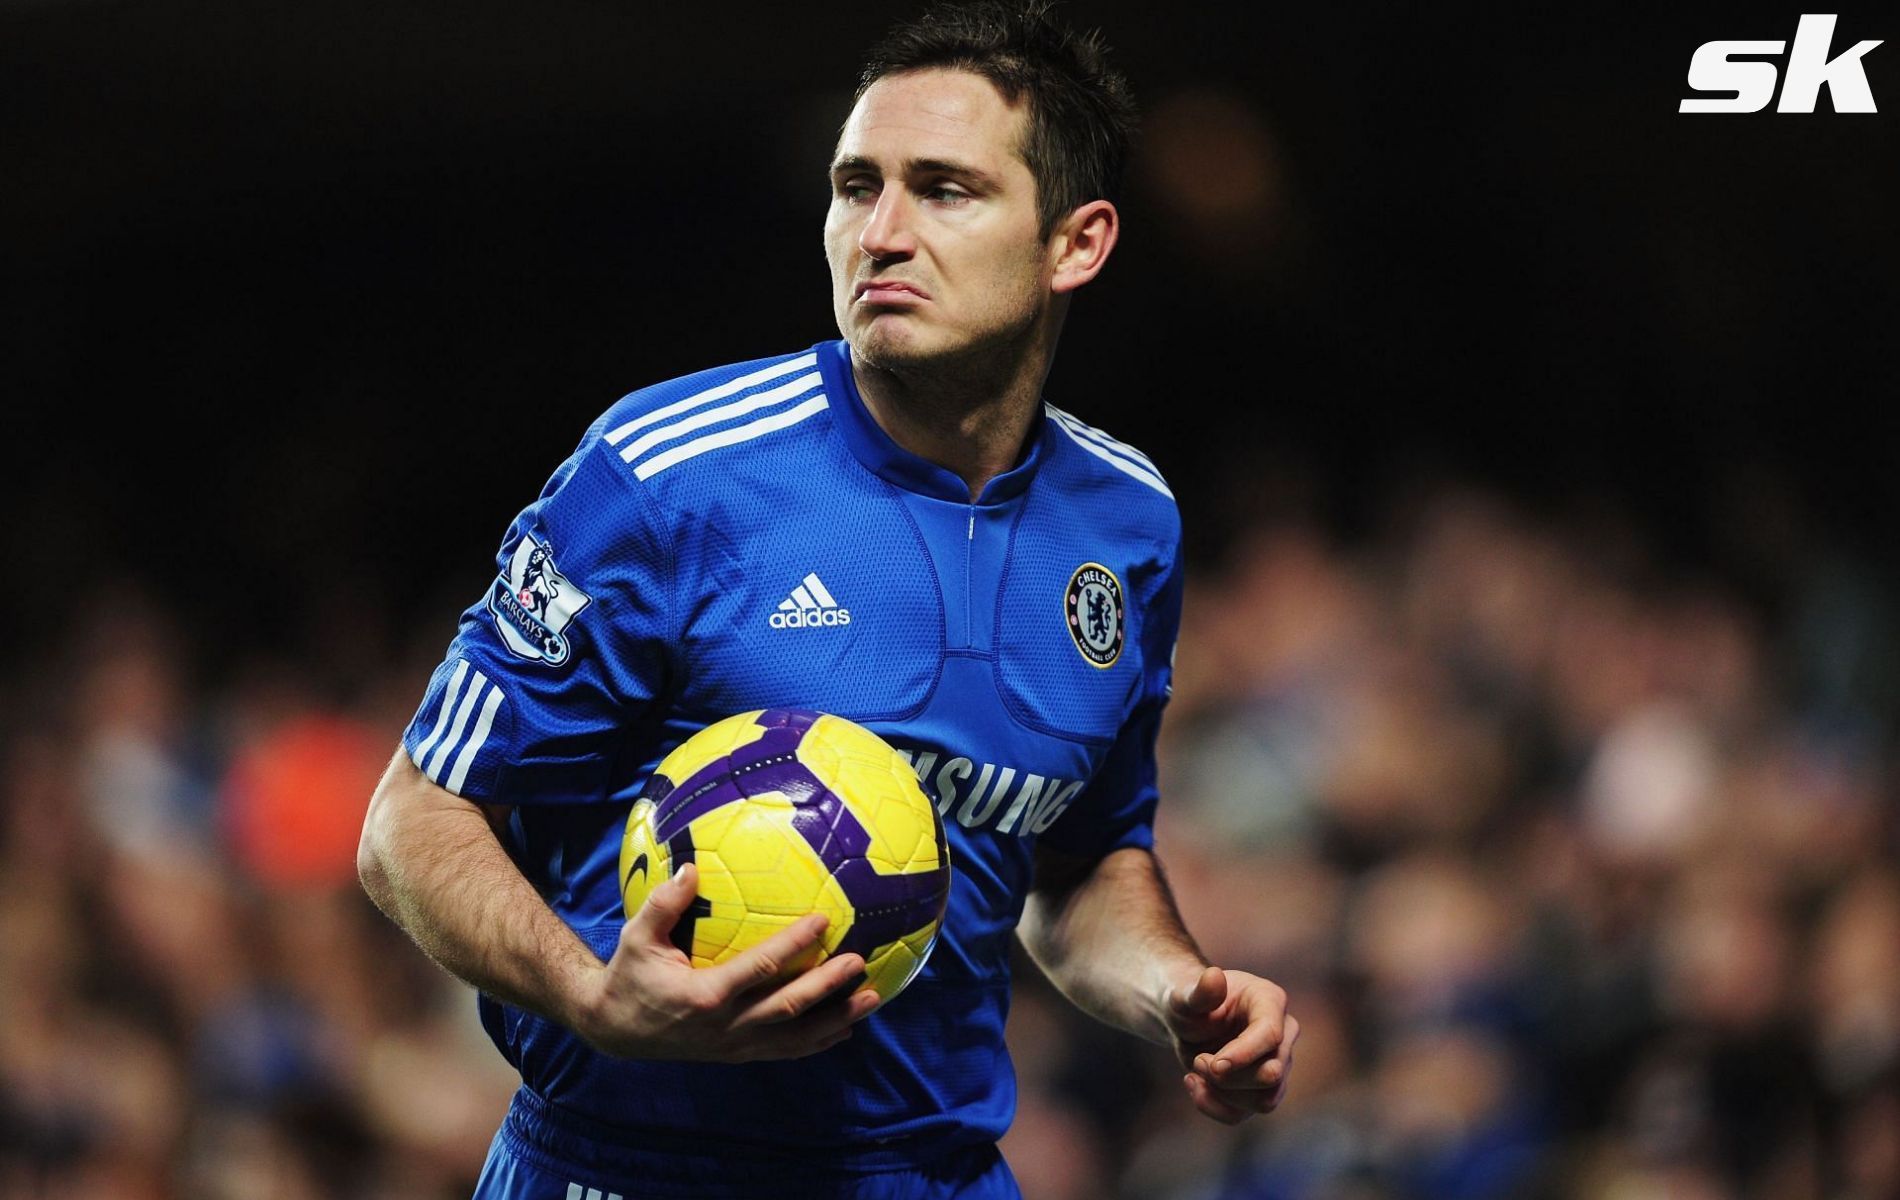 Frank Lampard ranks fourth in the most goals scored after reaching 30